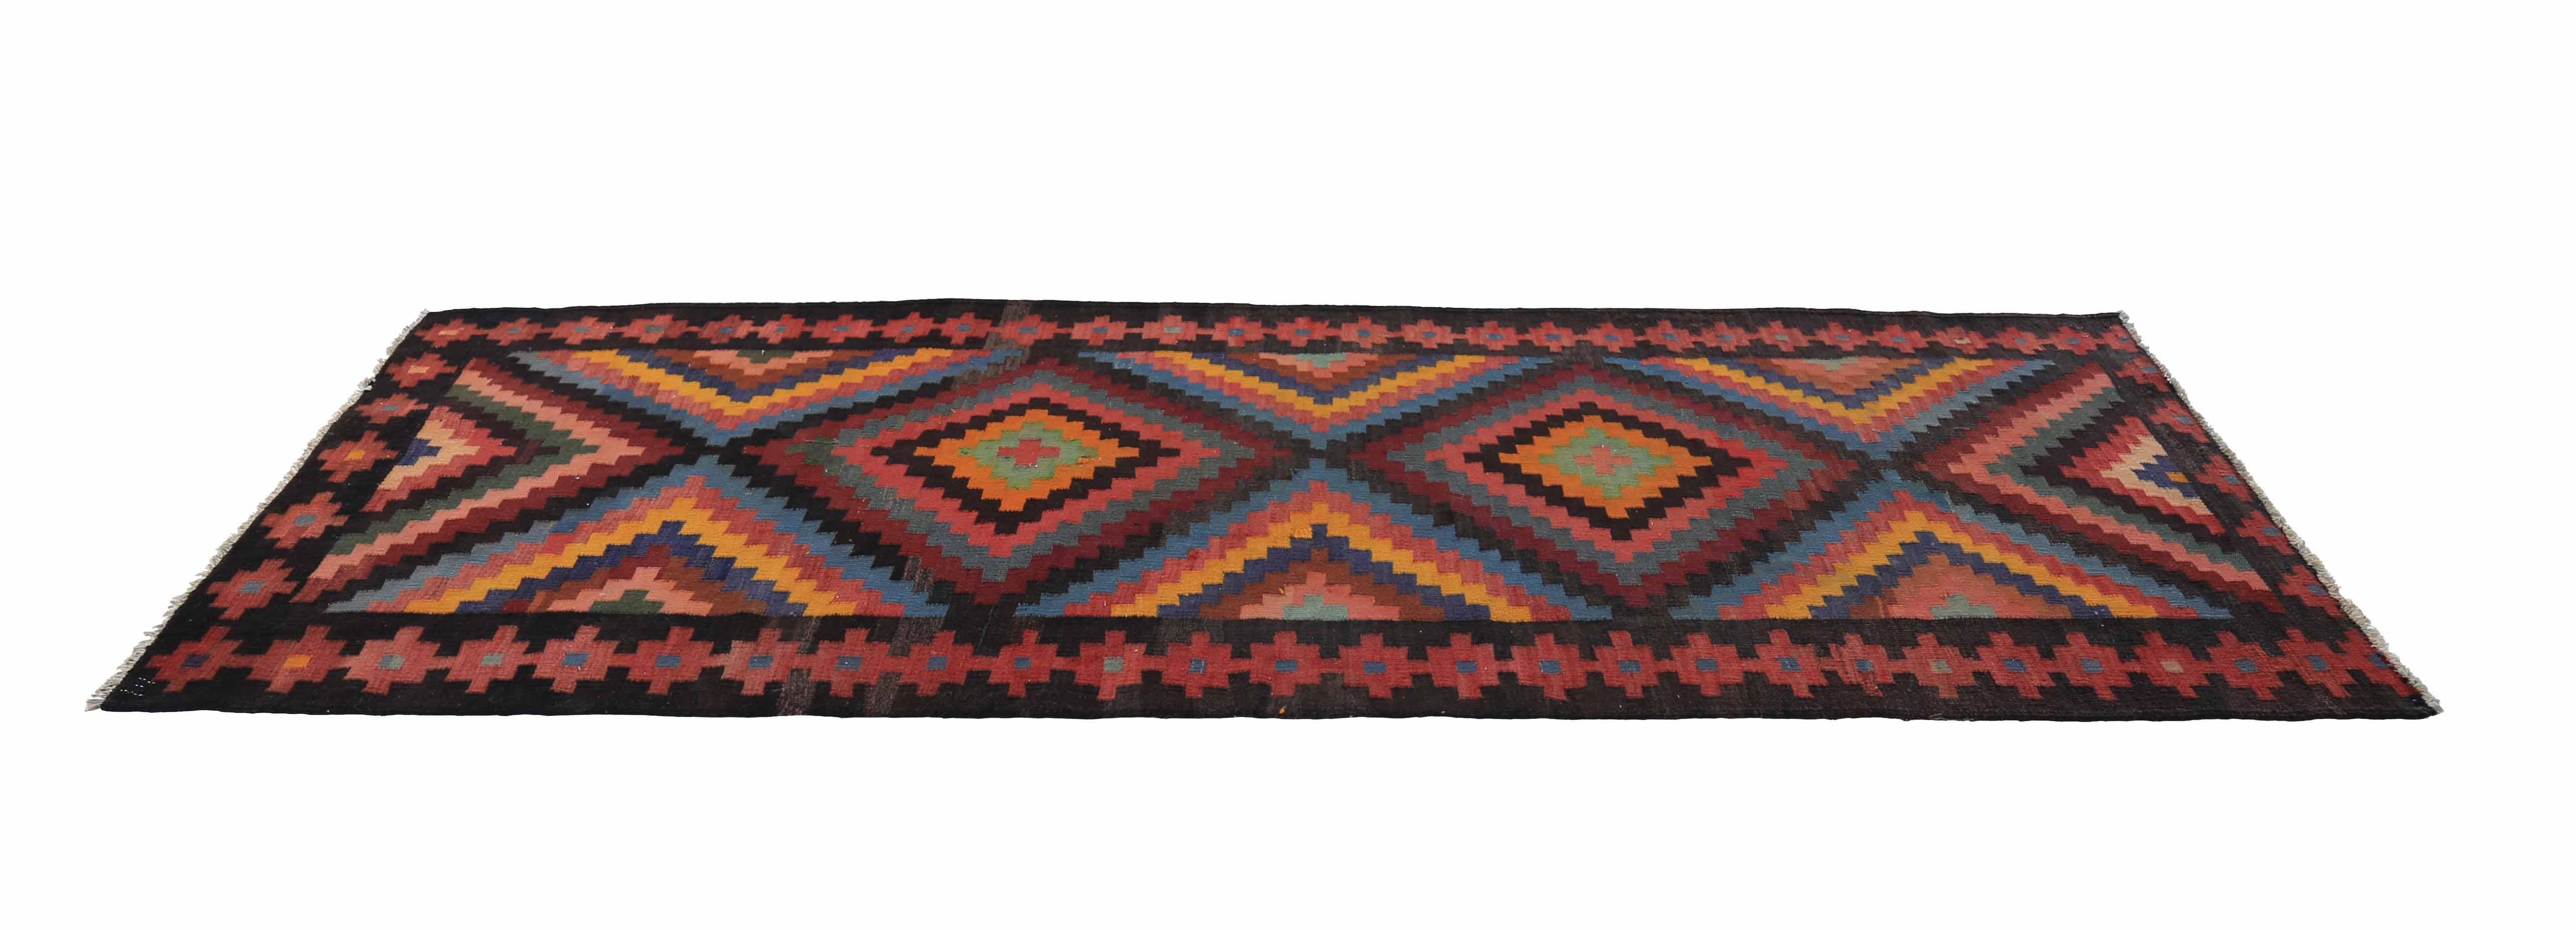 Hand-Woven Modern Turkish Kilim Runner Rug with Colored Diamond Details For Sale